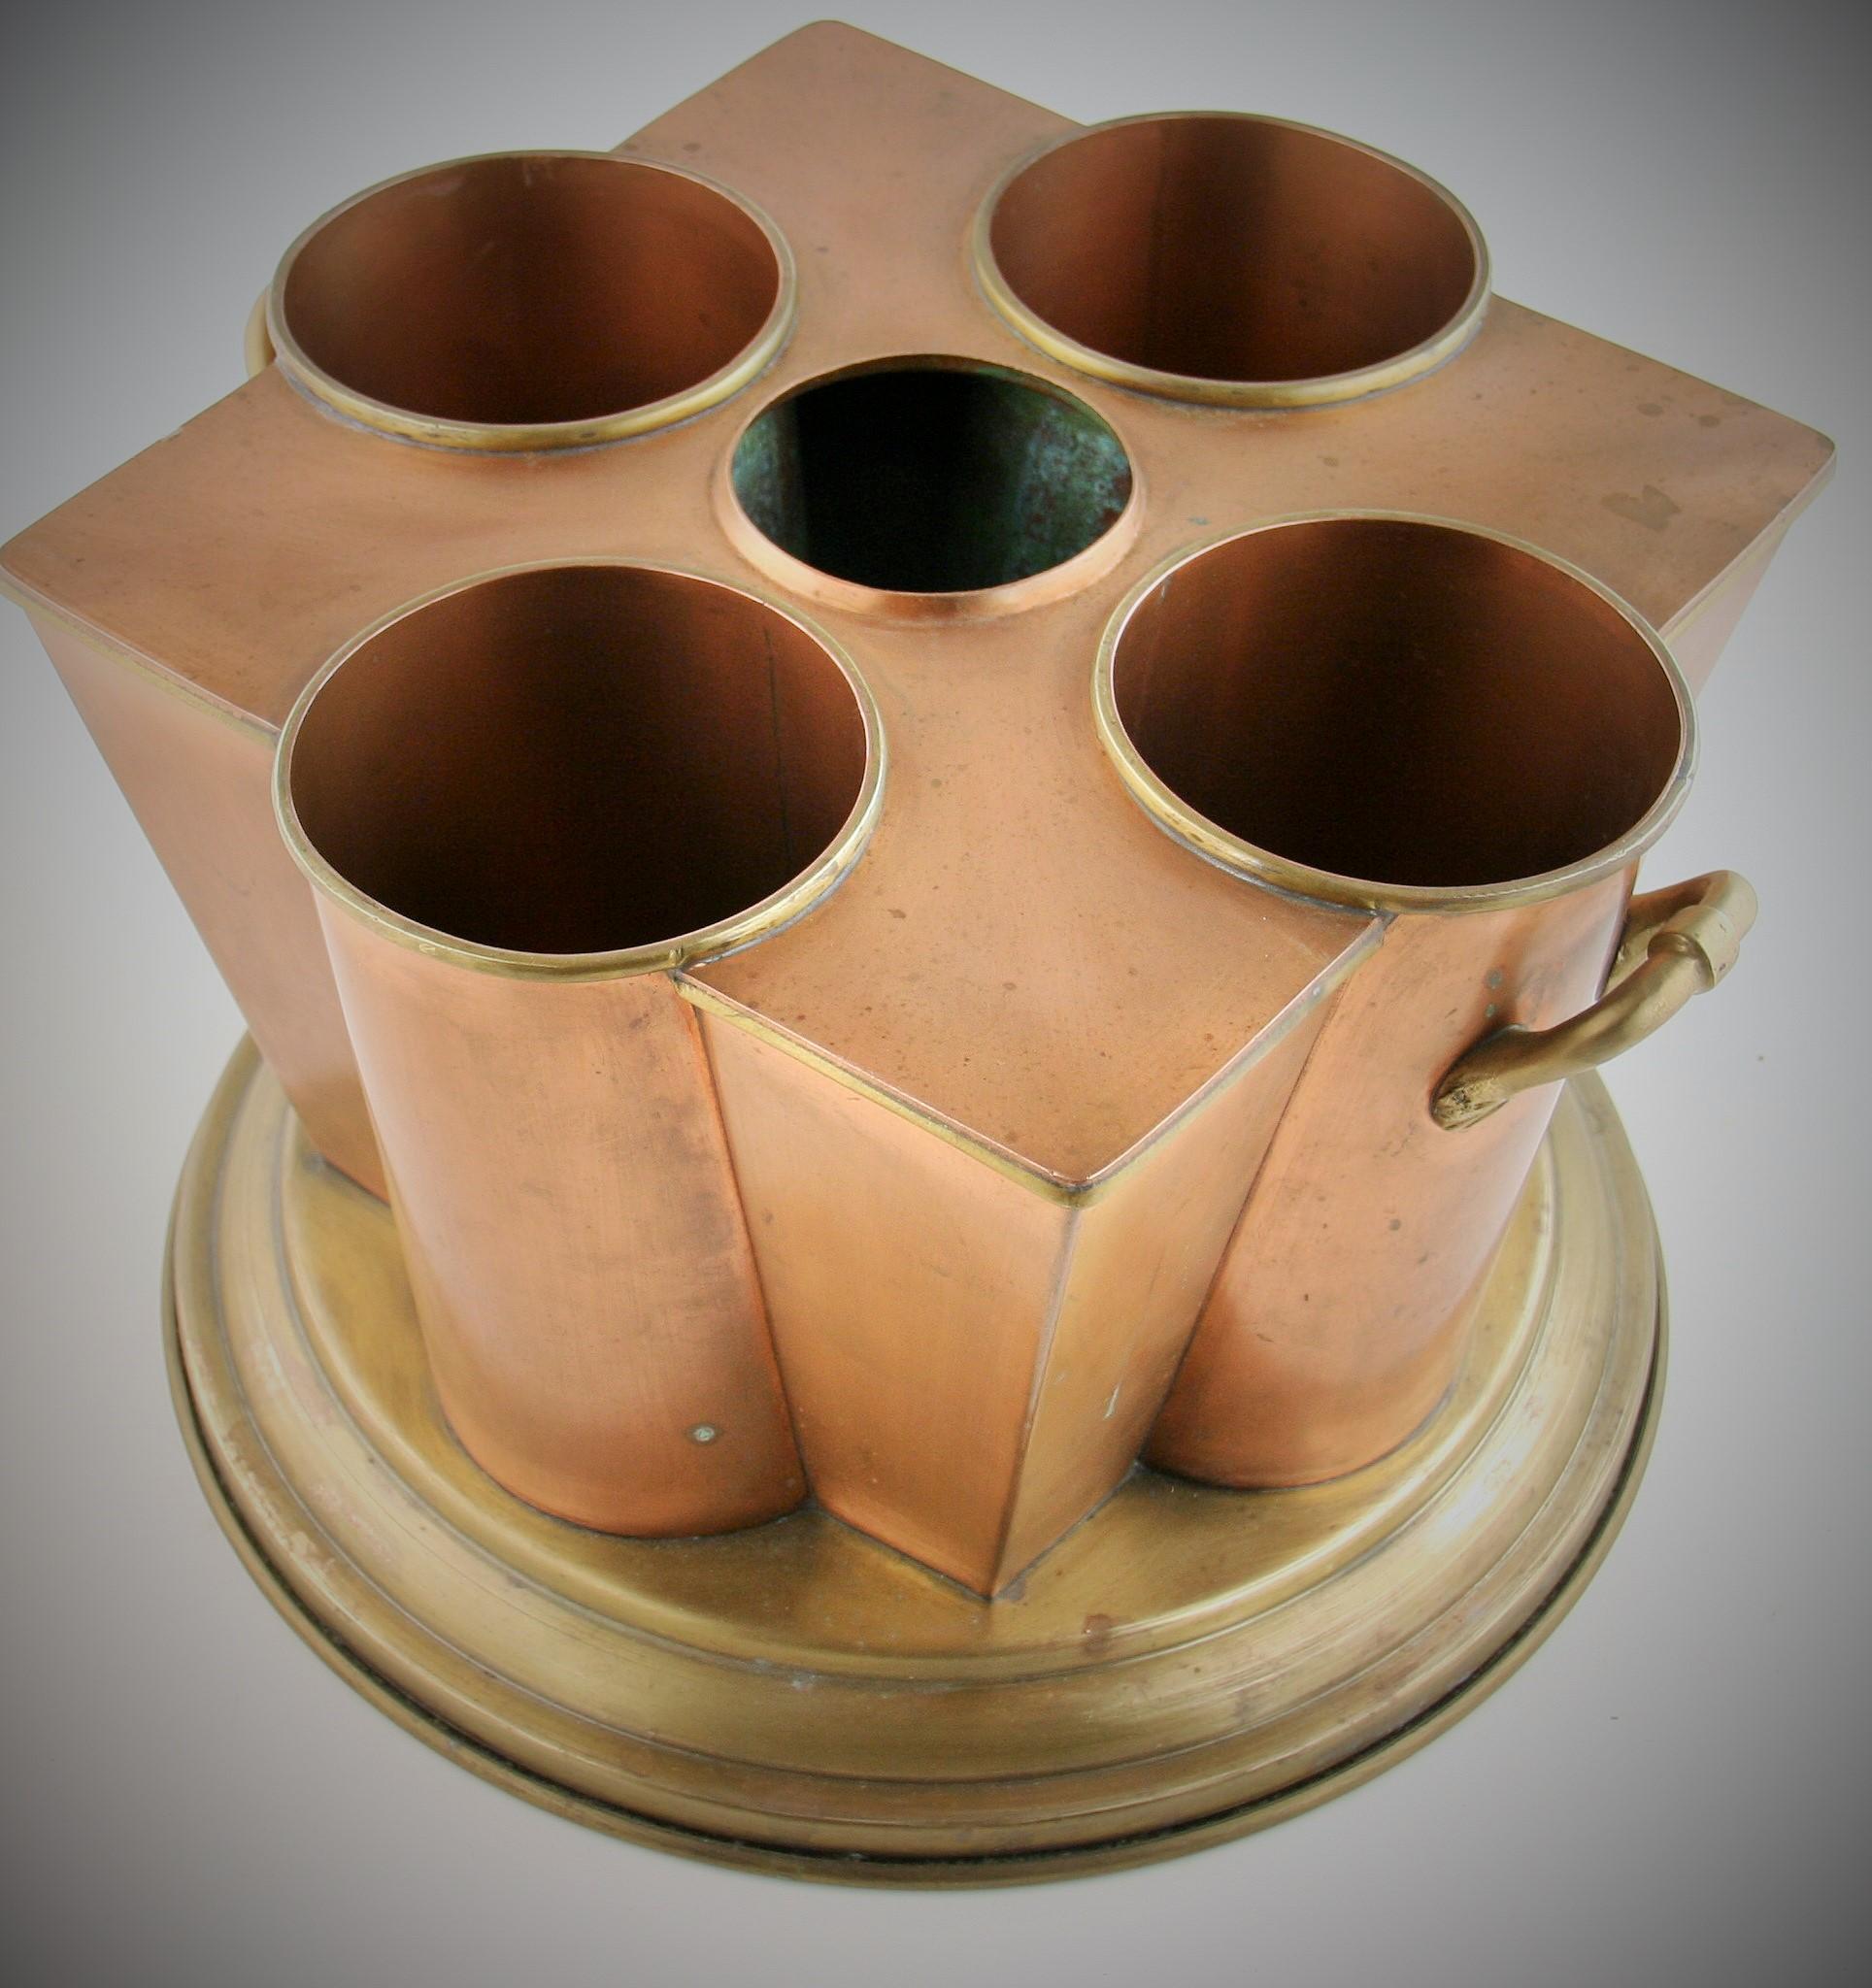 8-260 Modern geometric brass and copper center piece/flower holder with brass handles.
Top part is copper bottom is brass.
Can be used as wine cooler by placing ice in center compartment which will cool surrounding bottles
 